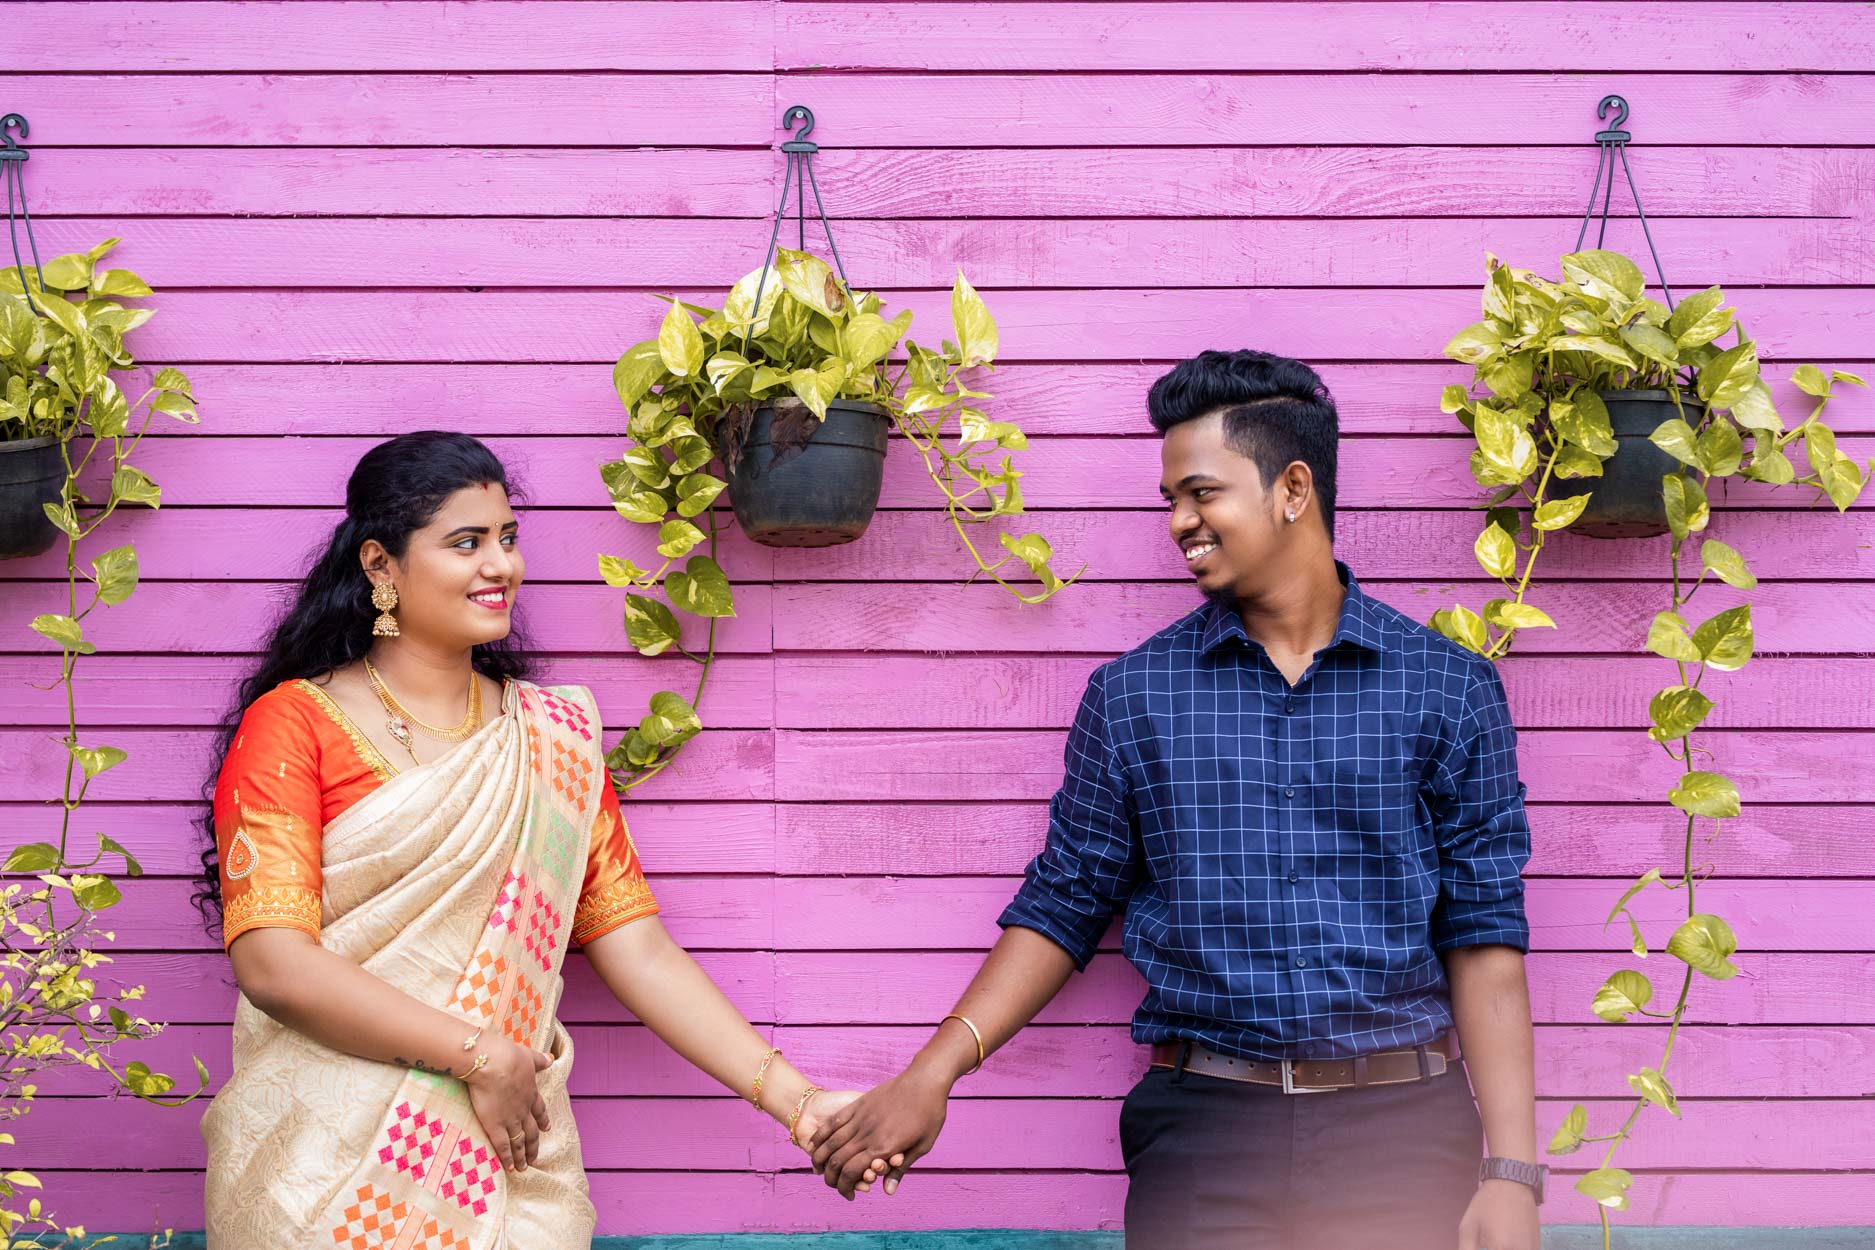 Ring Ceremony Indian Engagement Photography Poses